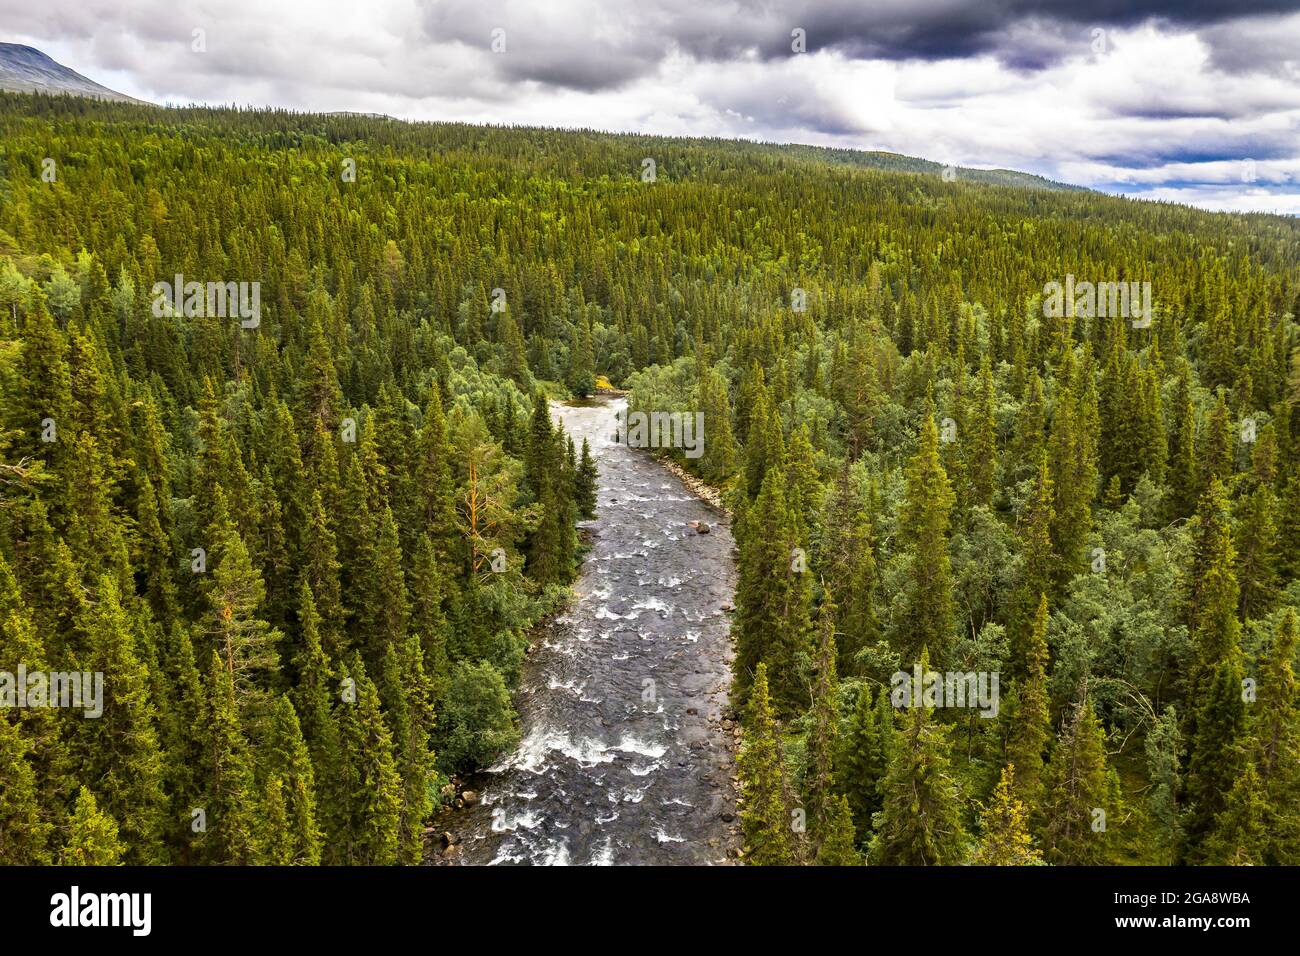 Mountain stream through coniferous forest in the Ljungdal mountains (Swedish: Ljungdalsfjällen).  Photo: Helikopterfoto / TT / code 11488 Stock Photo